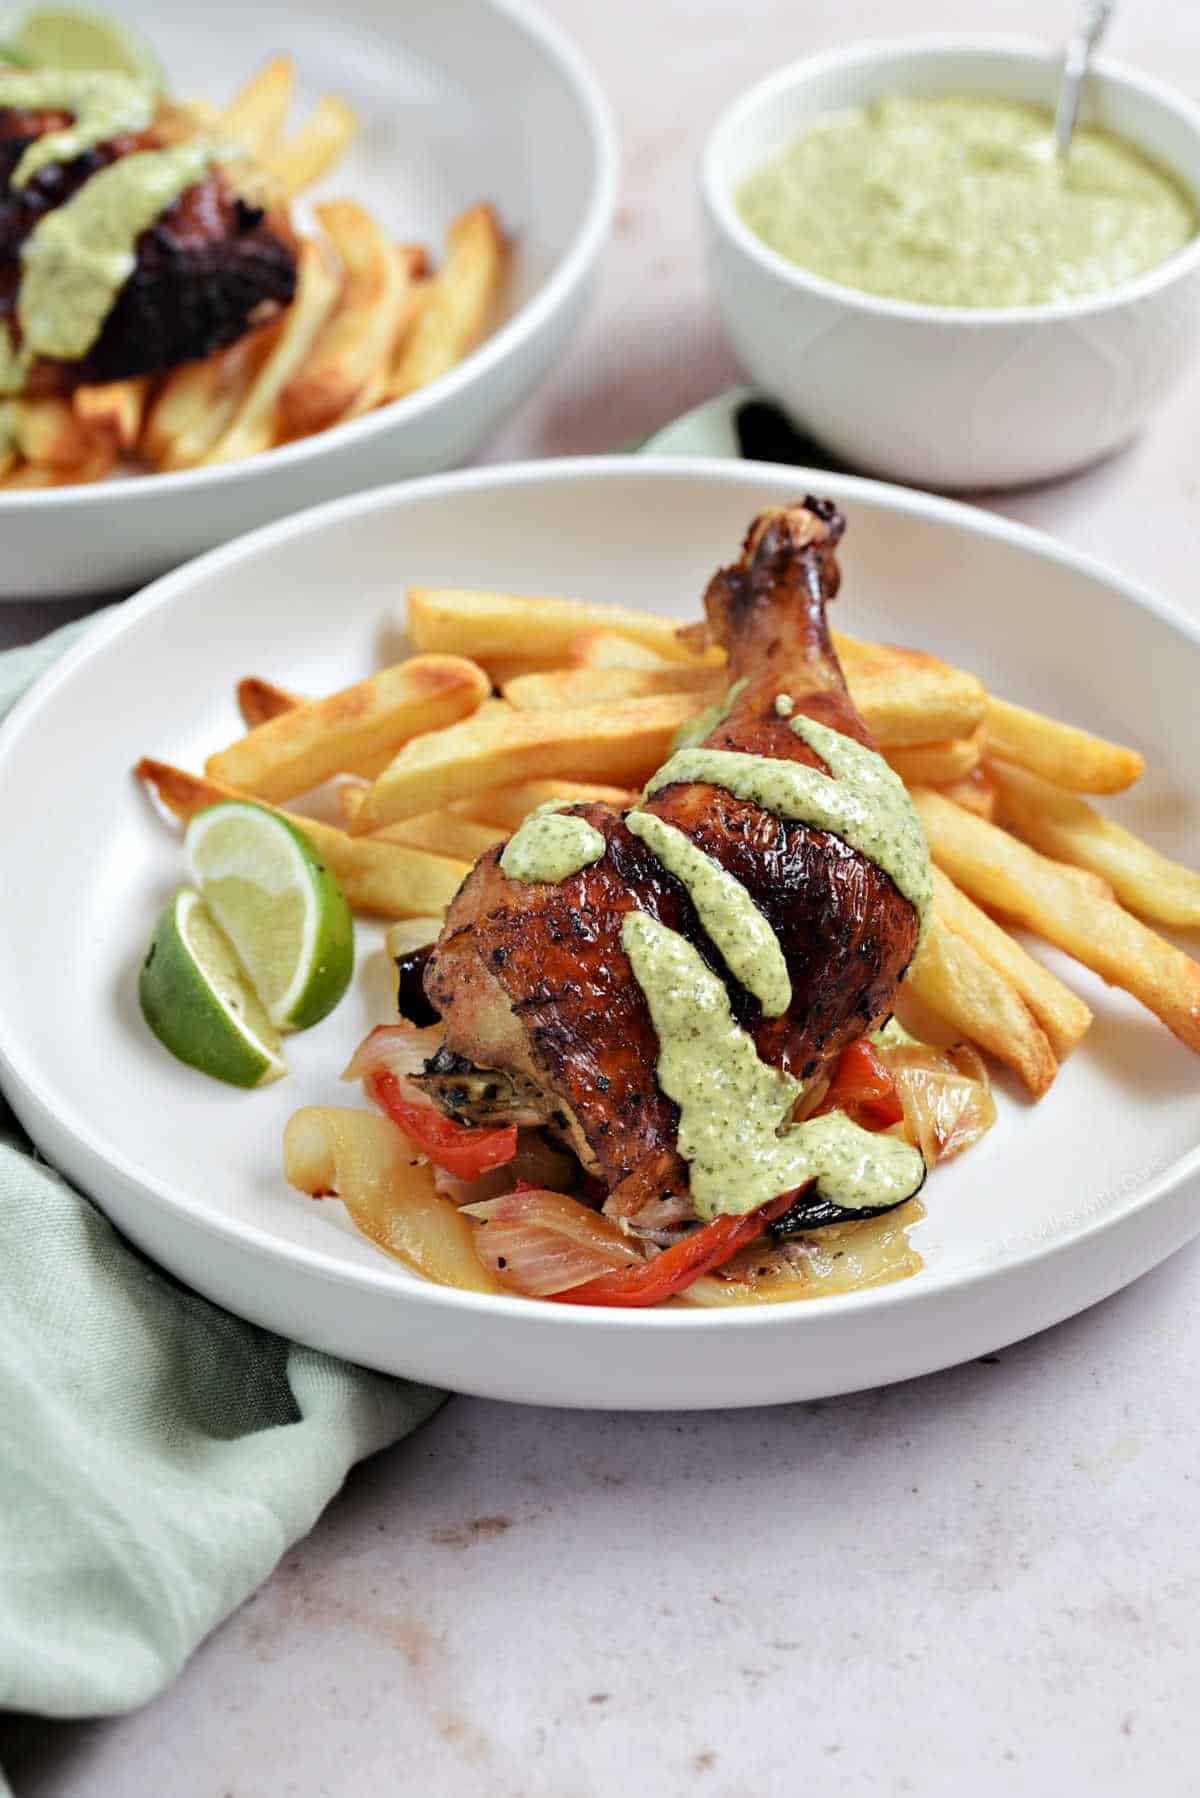 Roast chicken leg with green sauce on a bed of fries.